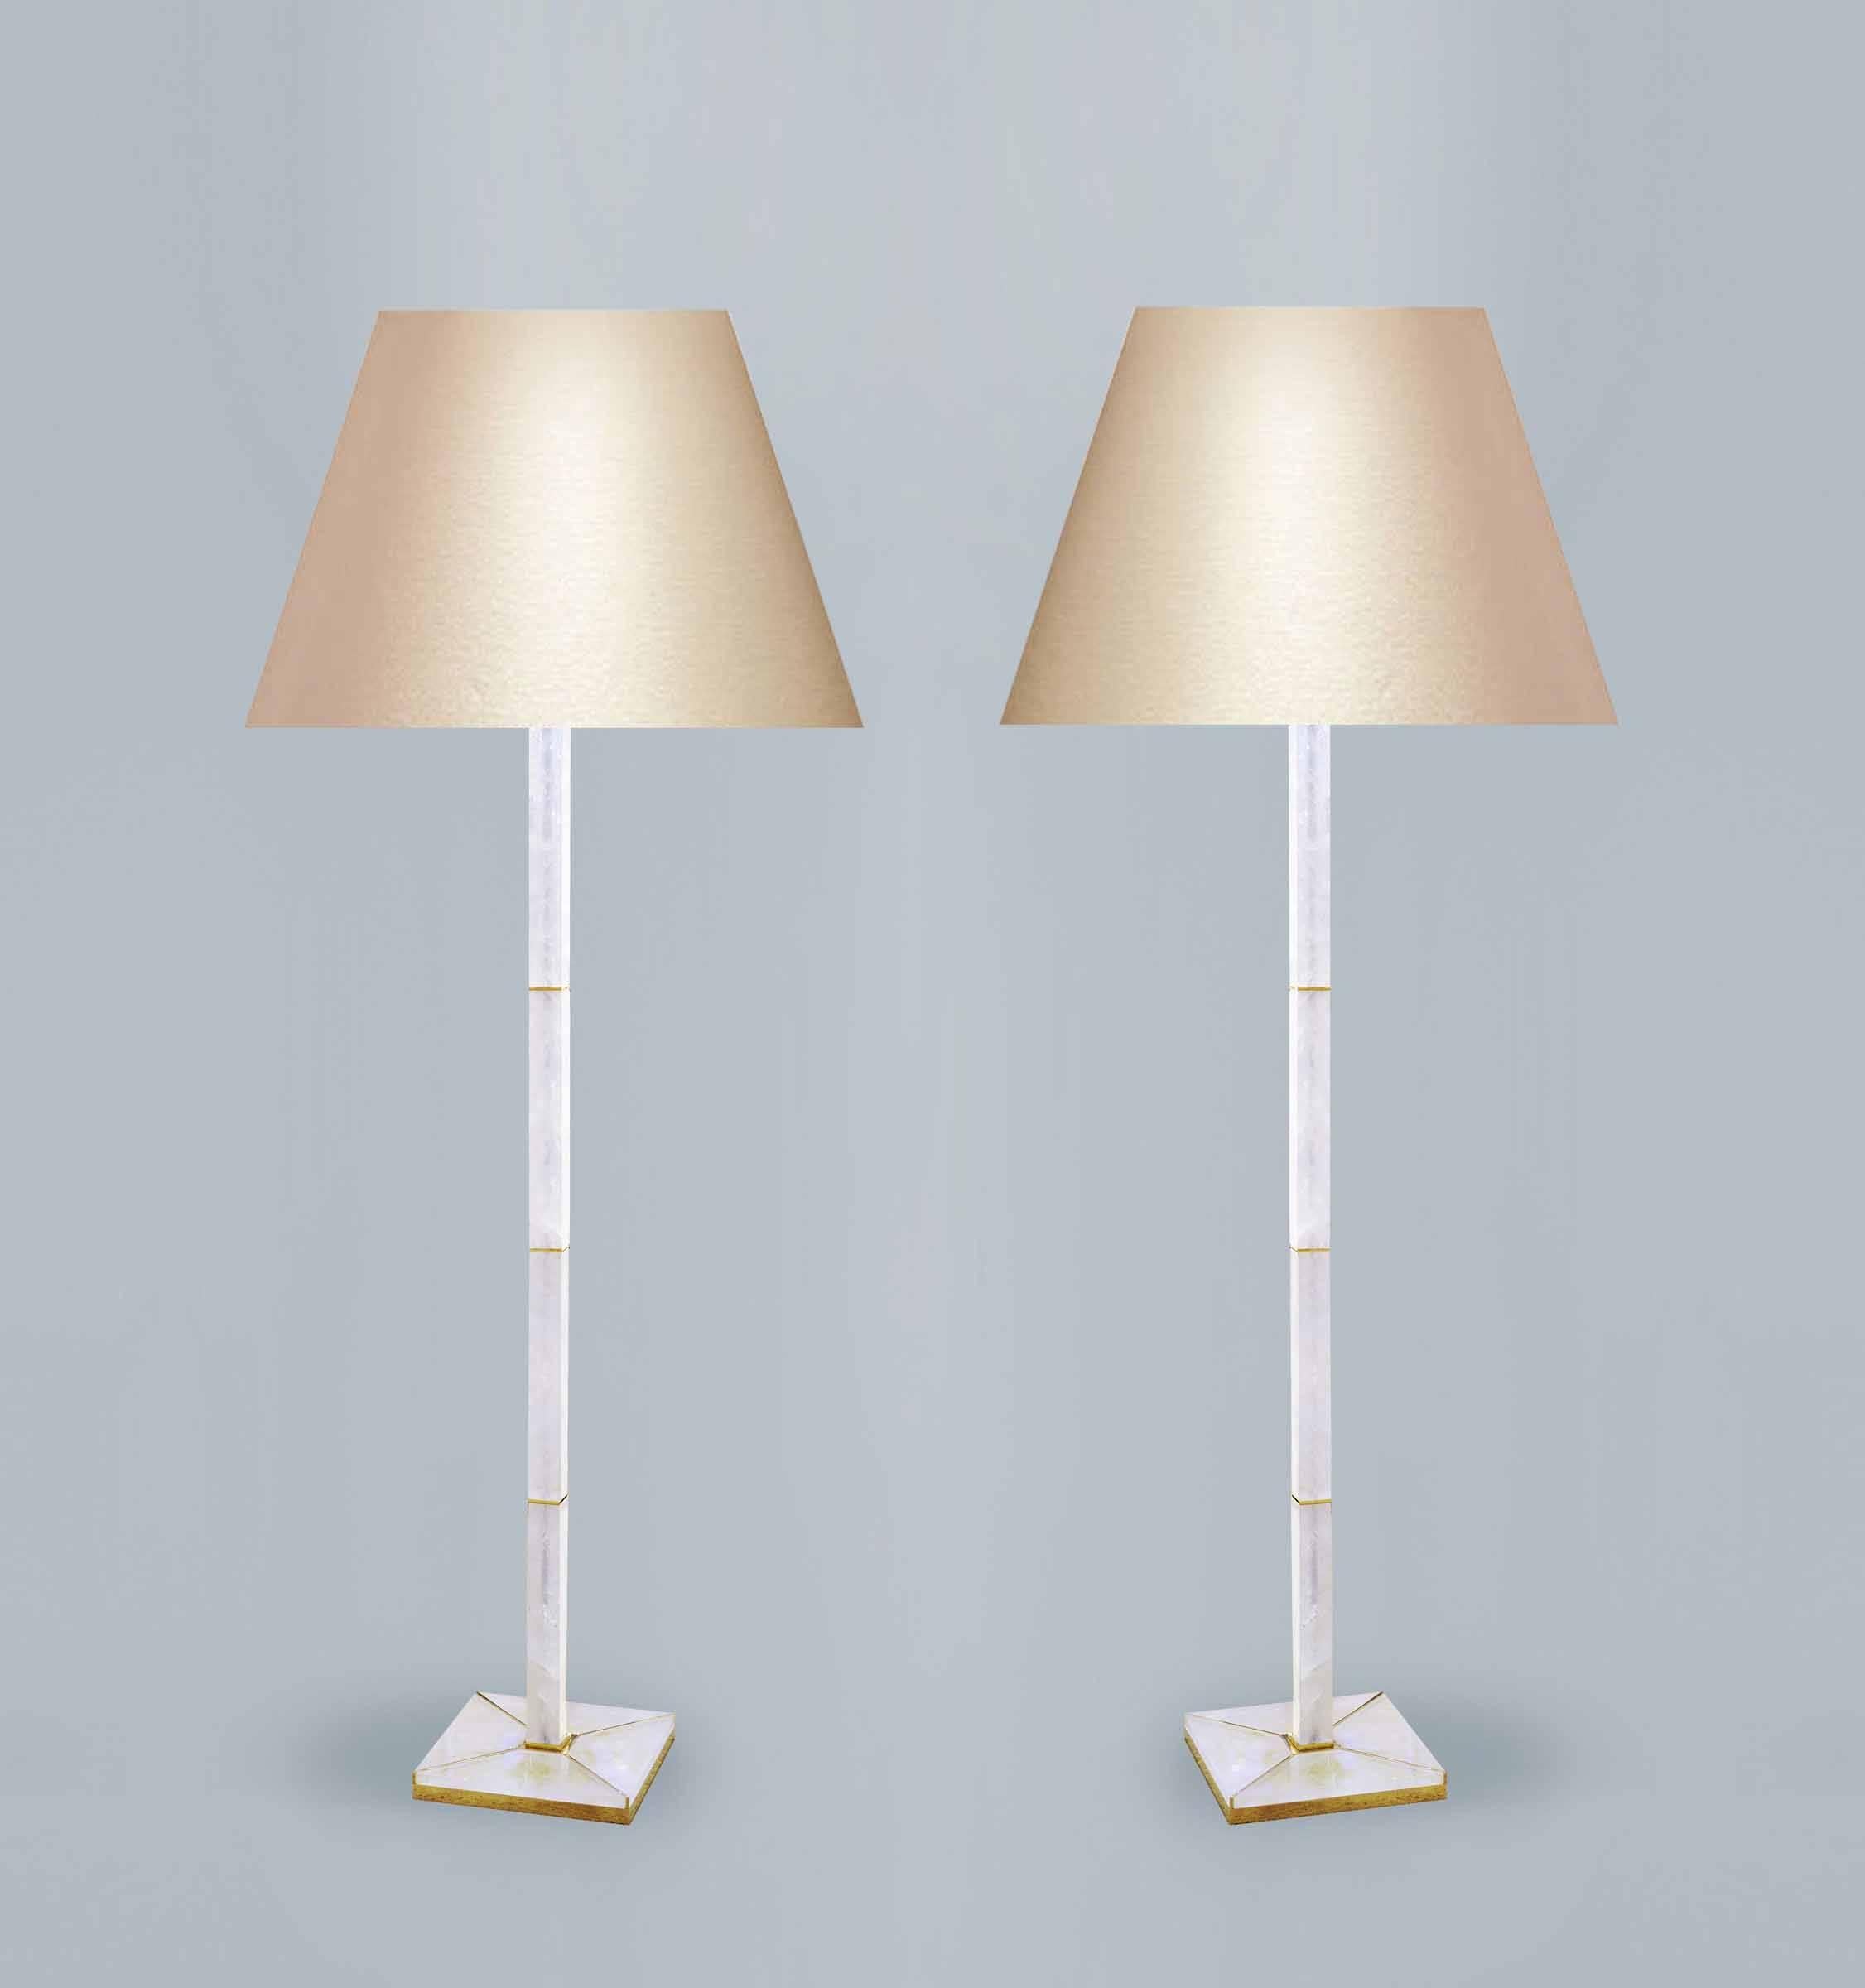 Pair of fine carved square column rock crystal floor lamps with a gilt metal base, created by Phoenix Gallery, NYC.
(Lampshade not included).
